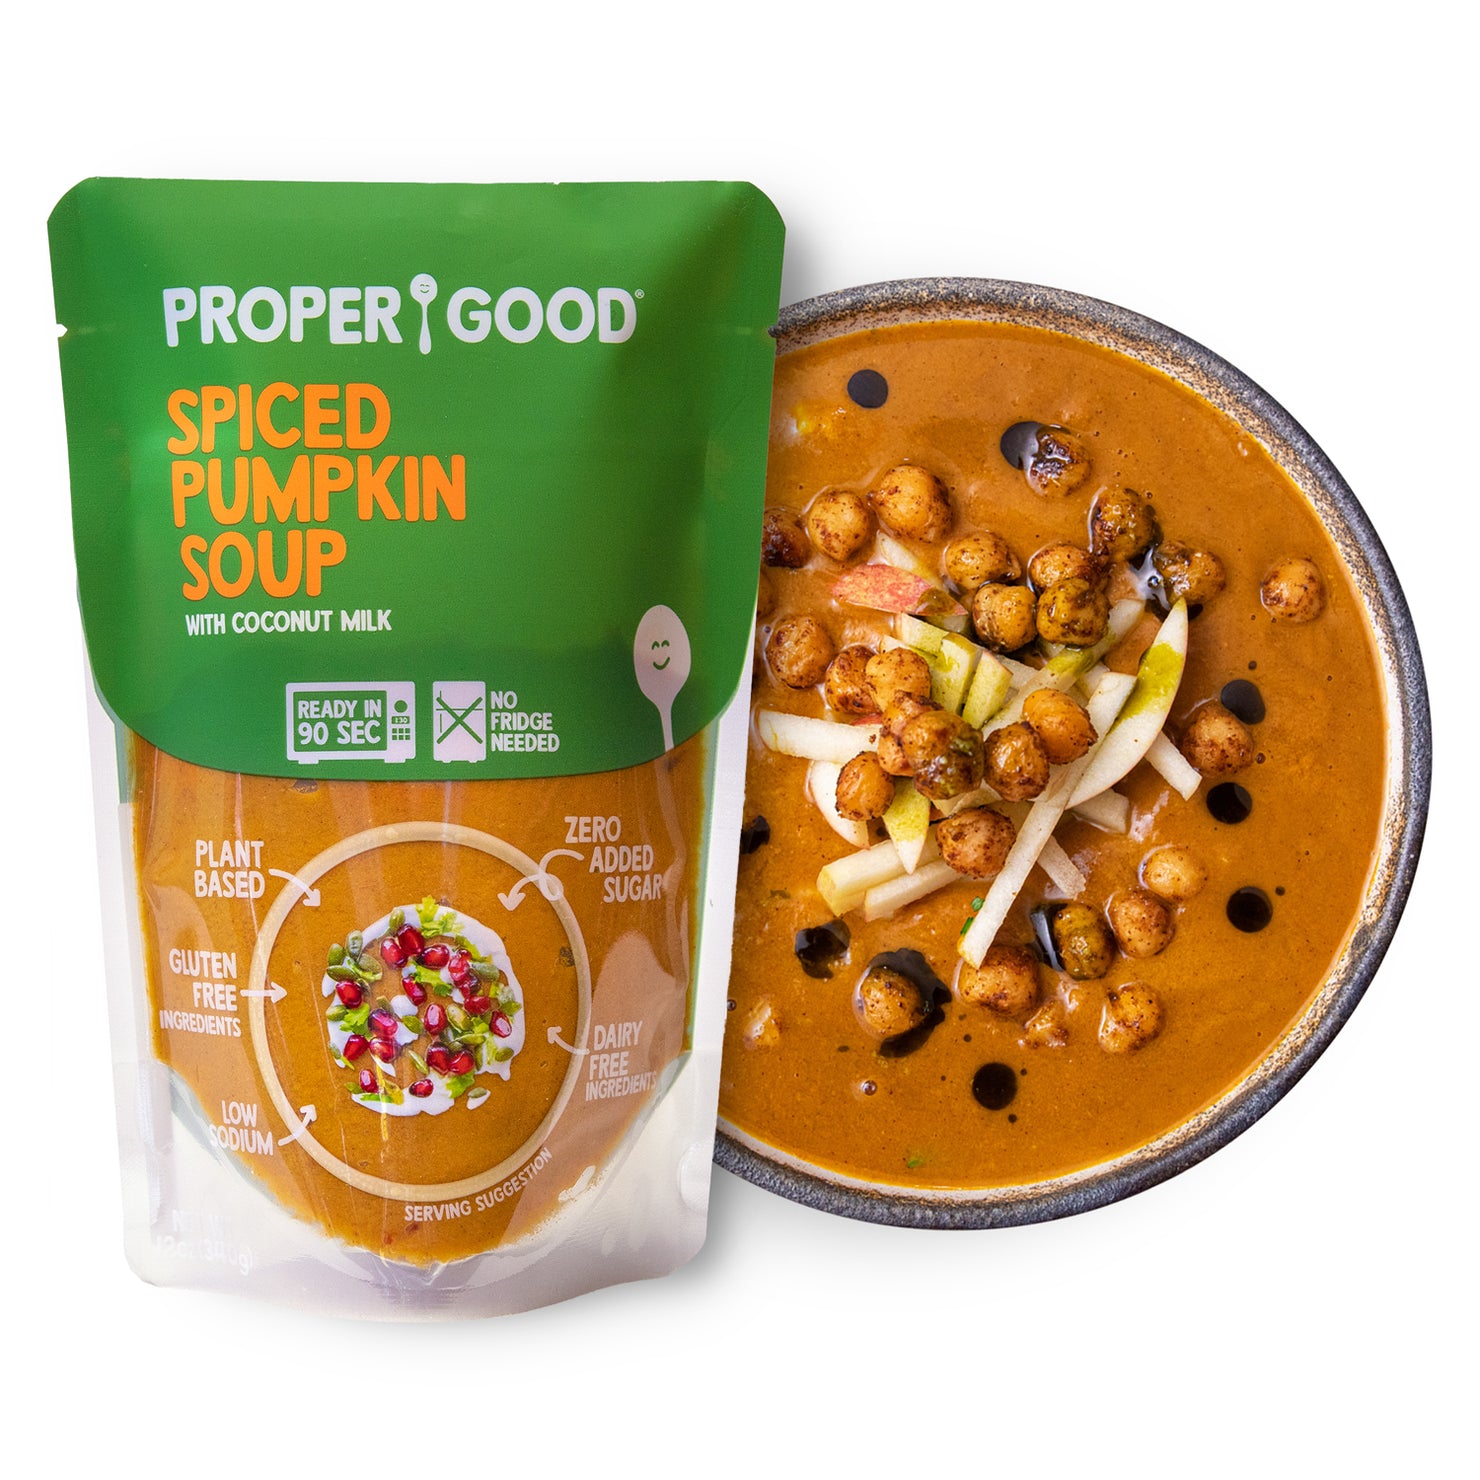 Spiced Pumpkin Soup in Bowl and in Pouch - Eat Proper Good